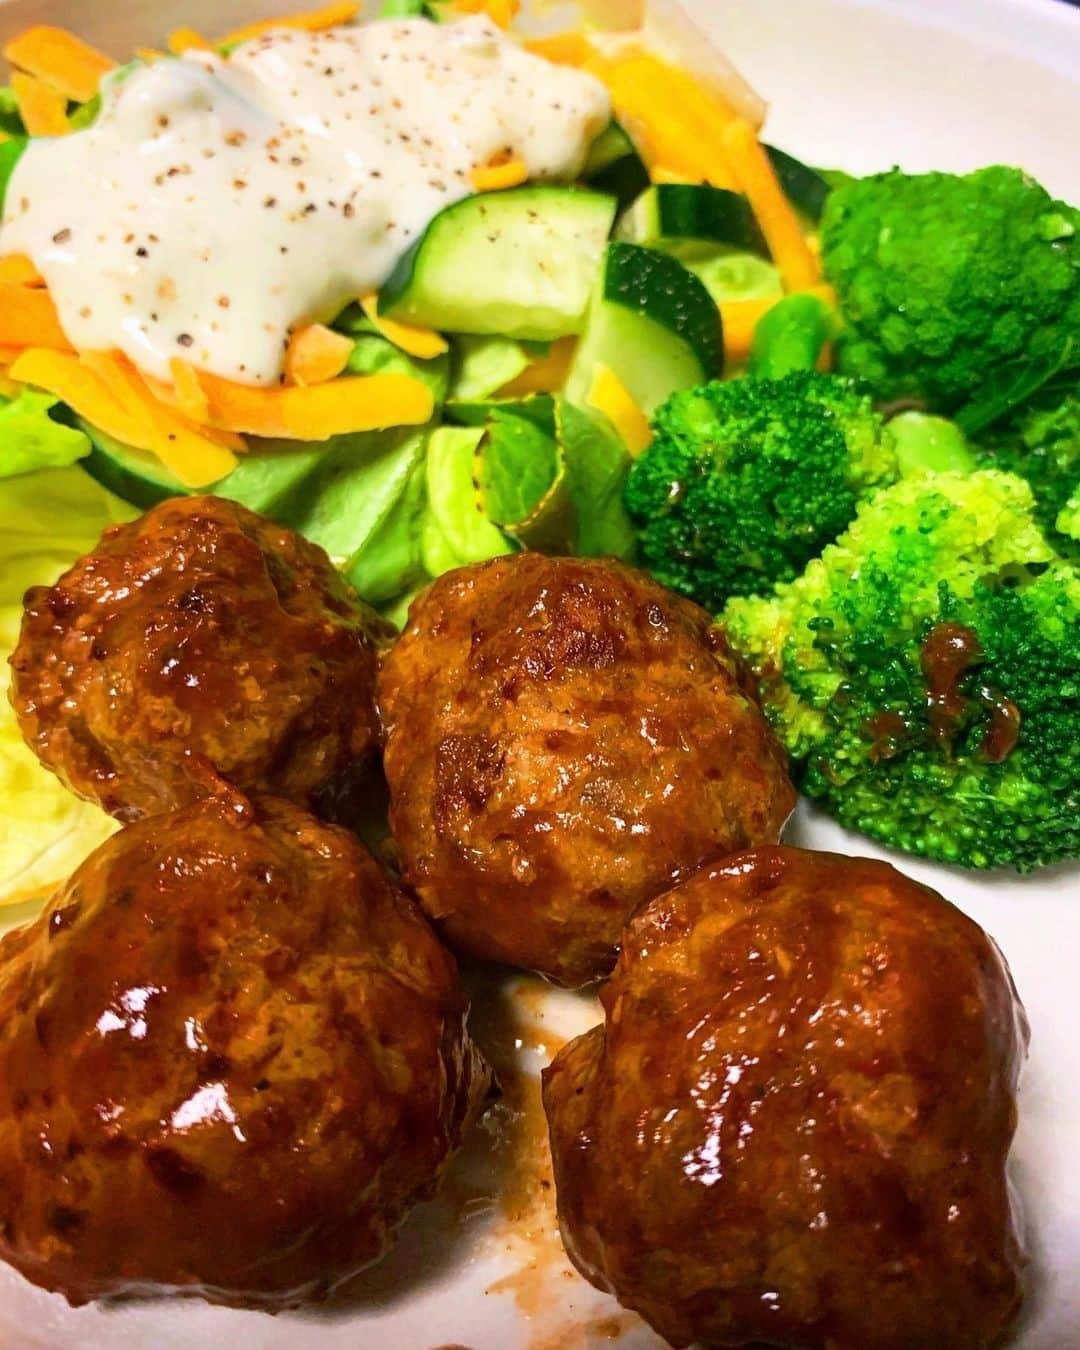 Flavorgod Seasoningsさんのインスタグラム写真 - (Flavorgod SeasoningsInstagram)「BBQ Keto Meatballs by @keto_rebel Seasoned with @flavorgod Honey BBQ Topper!⁠ -⁠ KETO friendly flavors available here ⬇️⁠ Click link in the bio -> @flavorgod⁠ www.flavorgod.com⁠ -⁠ You guys have to try this recipe! These are the most tender and flavorful meatballs! They literally couldn’t be easier to make and everyone always loves them.⁠ ⠀⁠ Here’s the recipe: ⤵️⁠ ⠀⁠ Ingredients:⁠ - 1 pound ground beef (80/20)⁠ - 1/4 cup finely minced onion, sautéed⁠ - 1/4 cup pork rind crumbs⁠ - 1 egg⁠ - splash of soy sauce⁠ - 1 tsp @flavorgod Honey BBQ seasoning⁠ - 1/2 tsp garlic powder⁠ - salt and pepper, to taste⁠ - any sugar-free BBQ sauce you prefer. I like @ghughessugarfree⁠ ⠀⁠ Instructions:⁠ * In a medium bowl, using your hands combine all ingredients together. Avoid over mixing since that usually results in tough meatballs.⁠ ⠀⁠ * Take about 2 Tbsp of mixture and roll it into golf-ball-sized balls.⁠ ⠀⁠ * Place meatballs in a single layer in the air fryer. Turn air fryer to 375 degrees.�⁠ * Cook meatballs for 10-12 minutes or until browned and the center of the meatball is fully cooked.⁠ ⠀⁠ * Remove the meatballs from the air fryer and toss in your sugar-free BBQ sauce.⁠ -⁠ Flavor God Seasonings are:⁠ ✅ZERO CALORIES PER SERVING⁠ ✅MADE FRESH⁠ ✅MADE LOCALLY IN US⁠ ✅FREE GIFTS AT CHECKOUT⁠ ✅GLUTEN FREE⁠ ✅#PALEO & #KETO FRIENDLY⁠ -⁠ #food #foodie #flavorgod #seasonings #glutenfree #mealprep #seasonings #breakfast #lunch #dinner #yummy #delicious #foodporn」2月12日 9時01分 - flavorgod